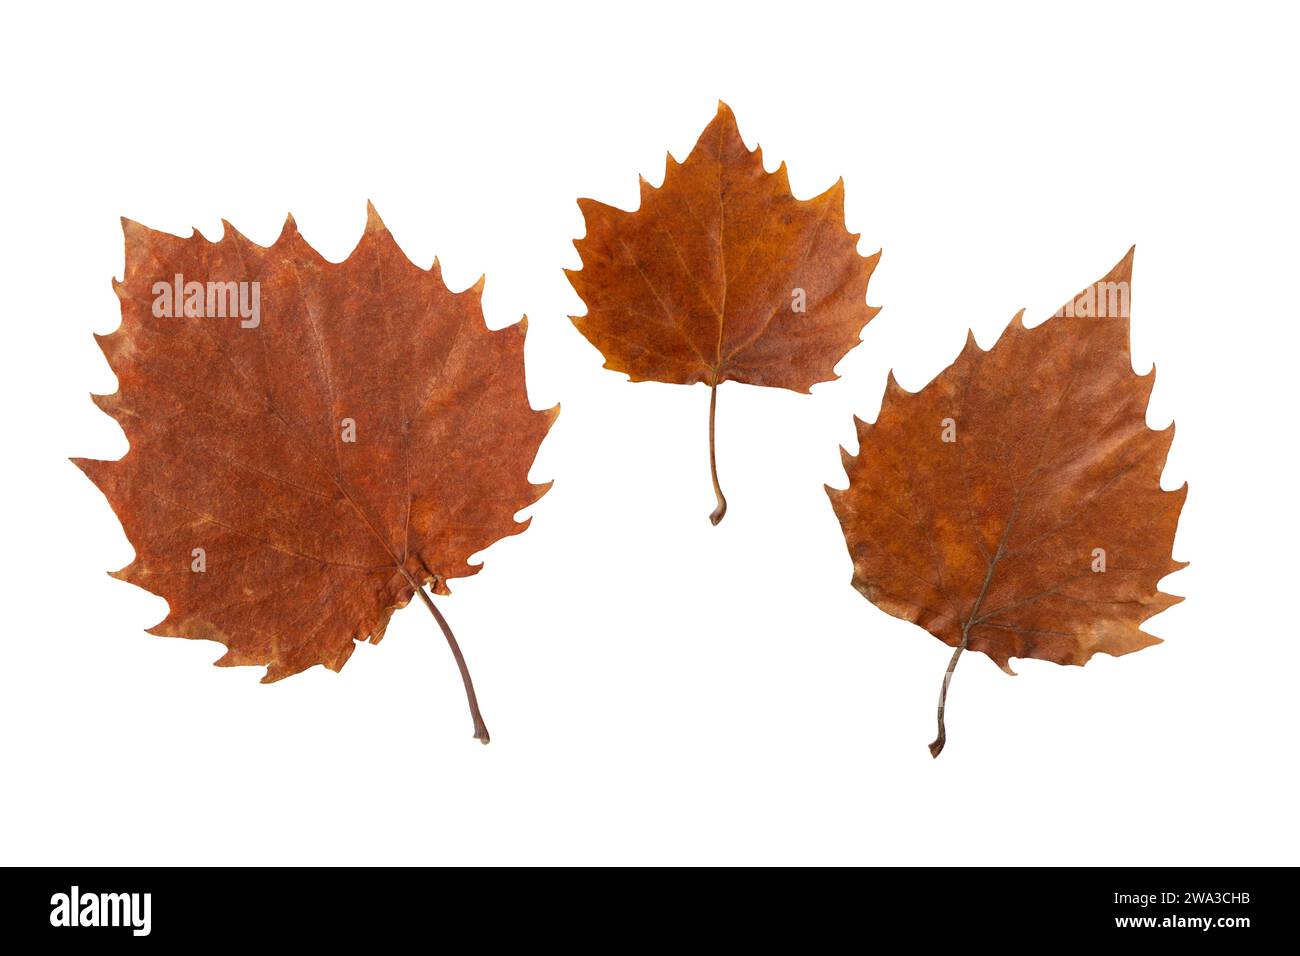 Autumn leaf with serrated margin isolated on white. Fall season dry brown foliage. Three different size leaves collection from one tree Stock Photo